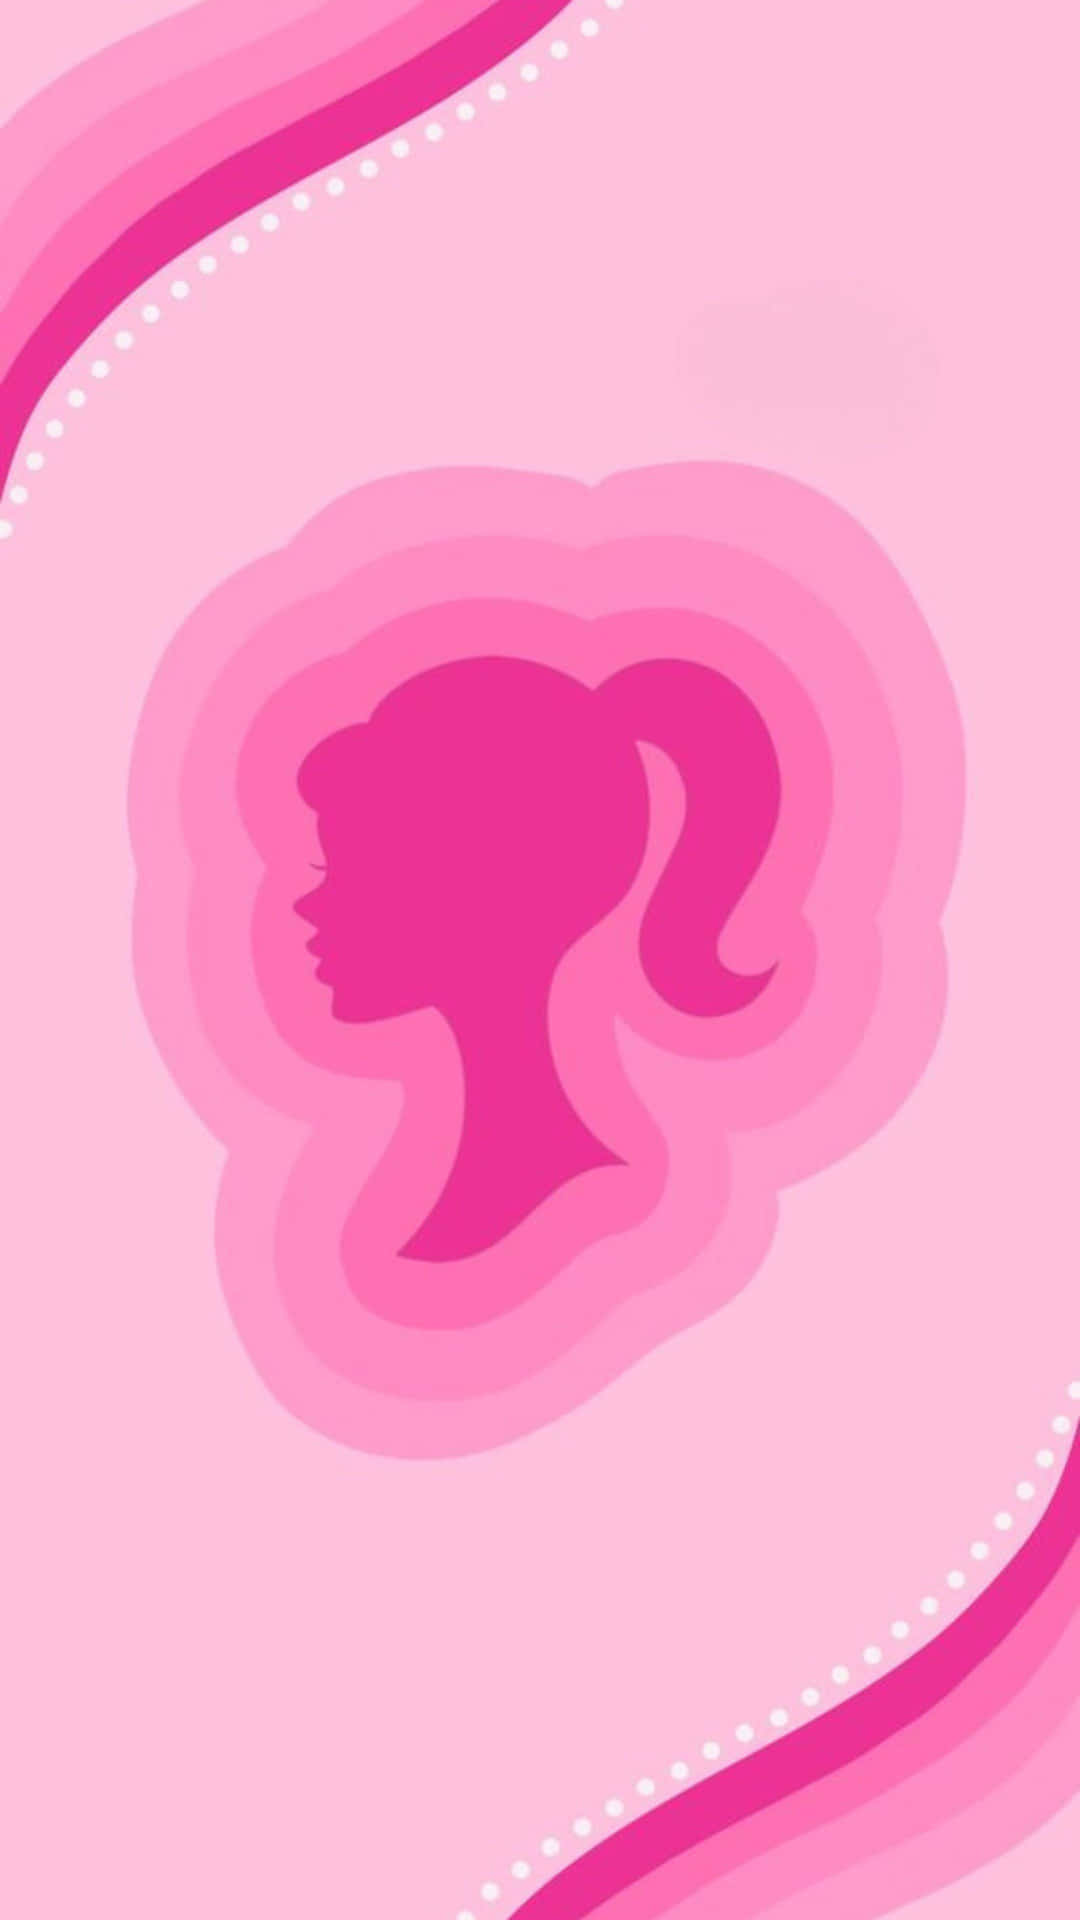 Barbie Silhouette Pink Background Wallpaper